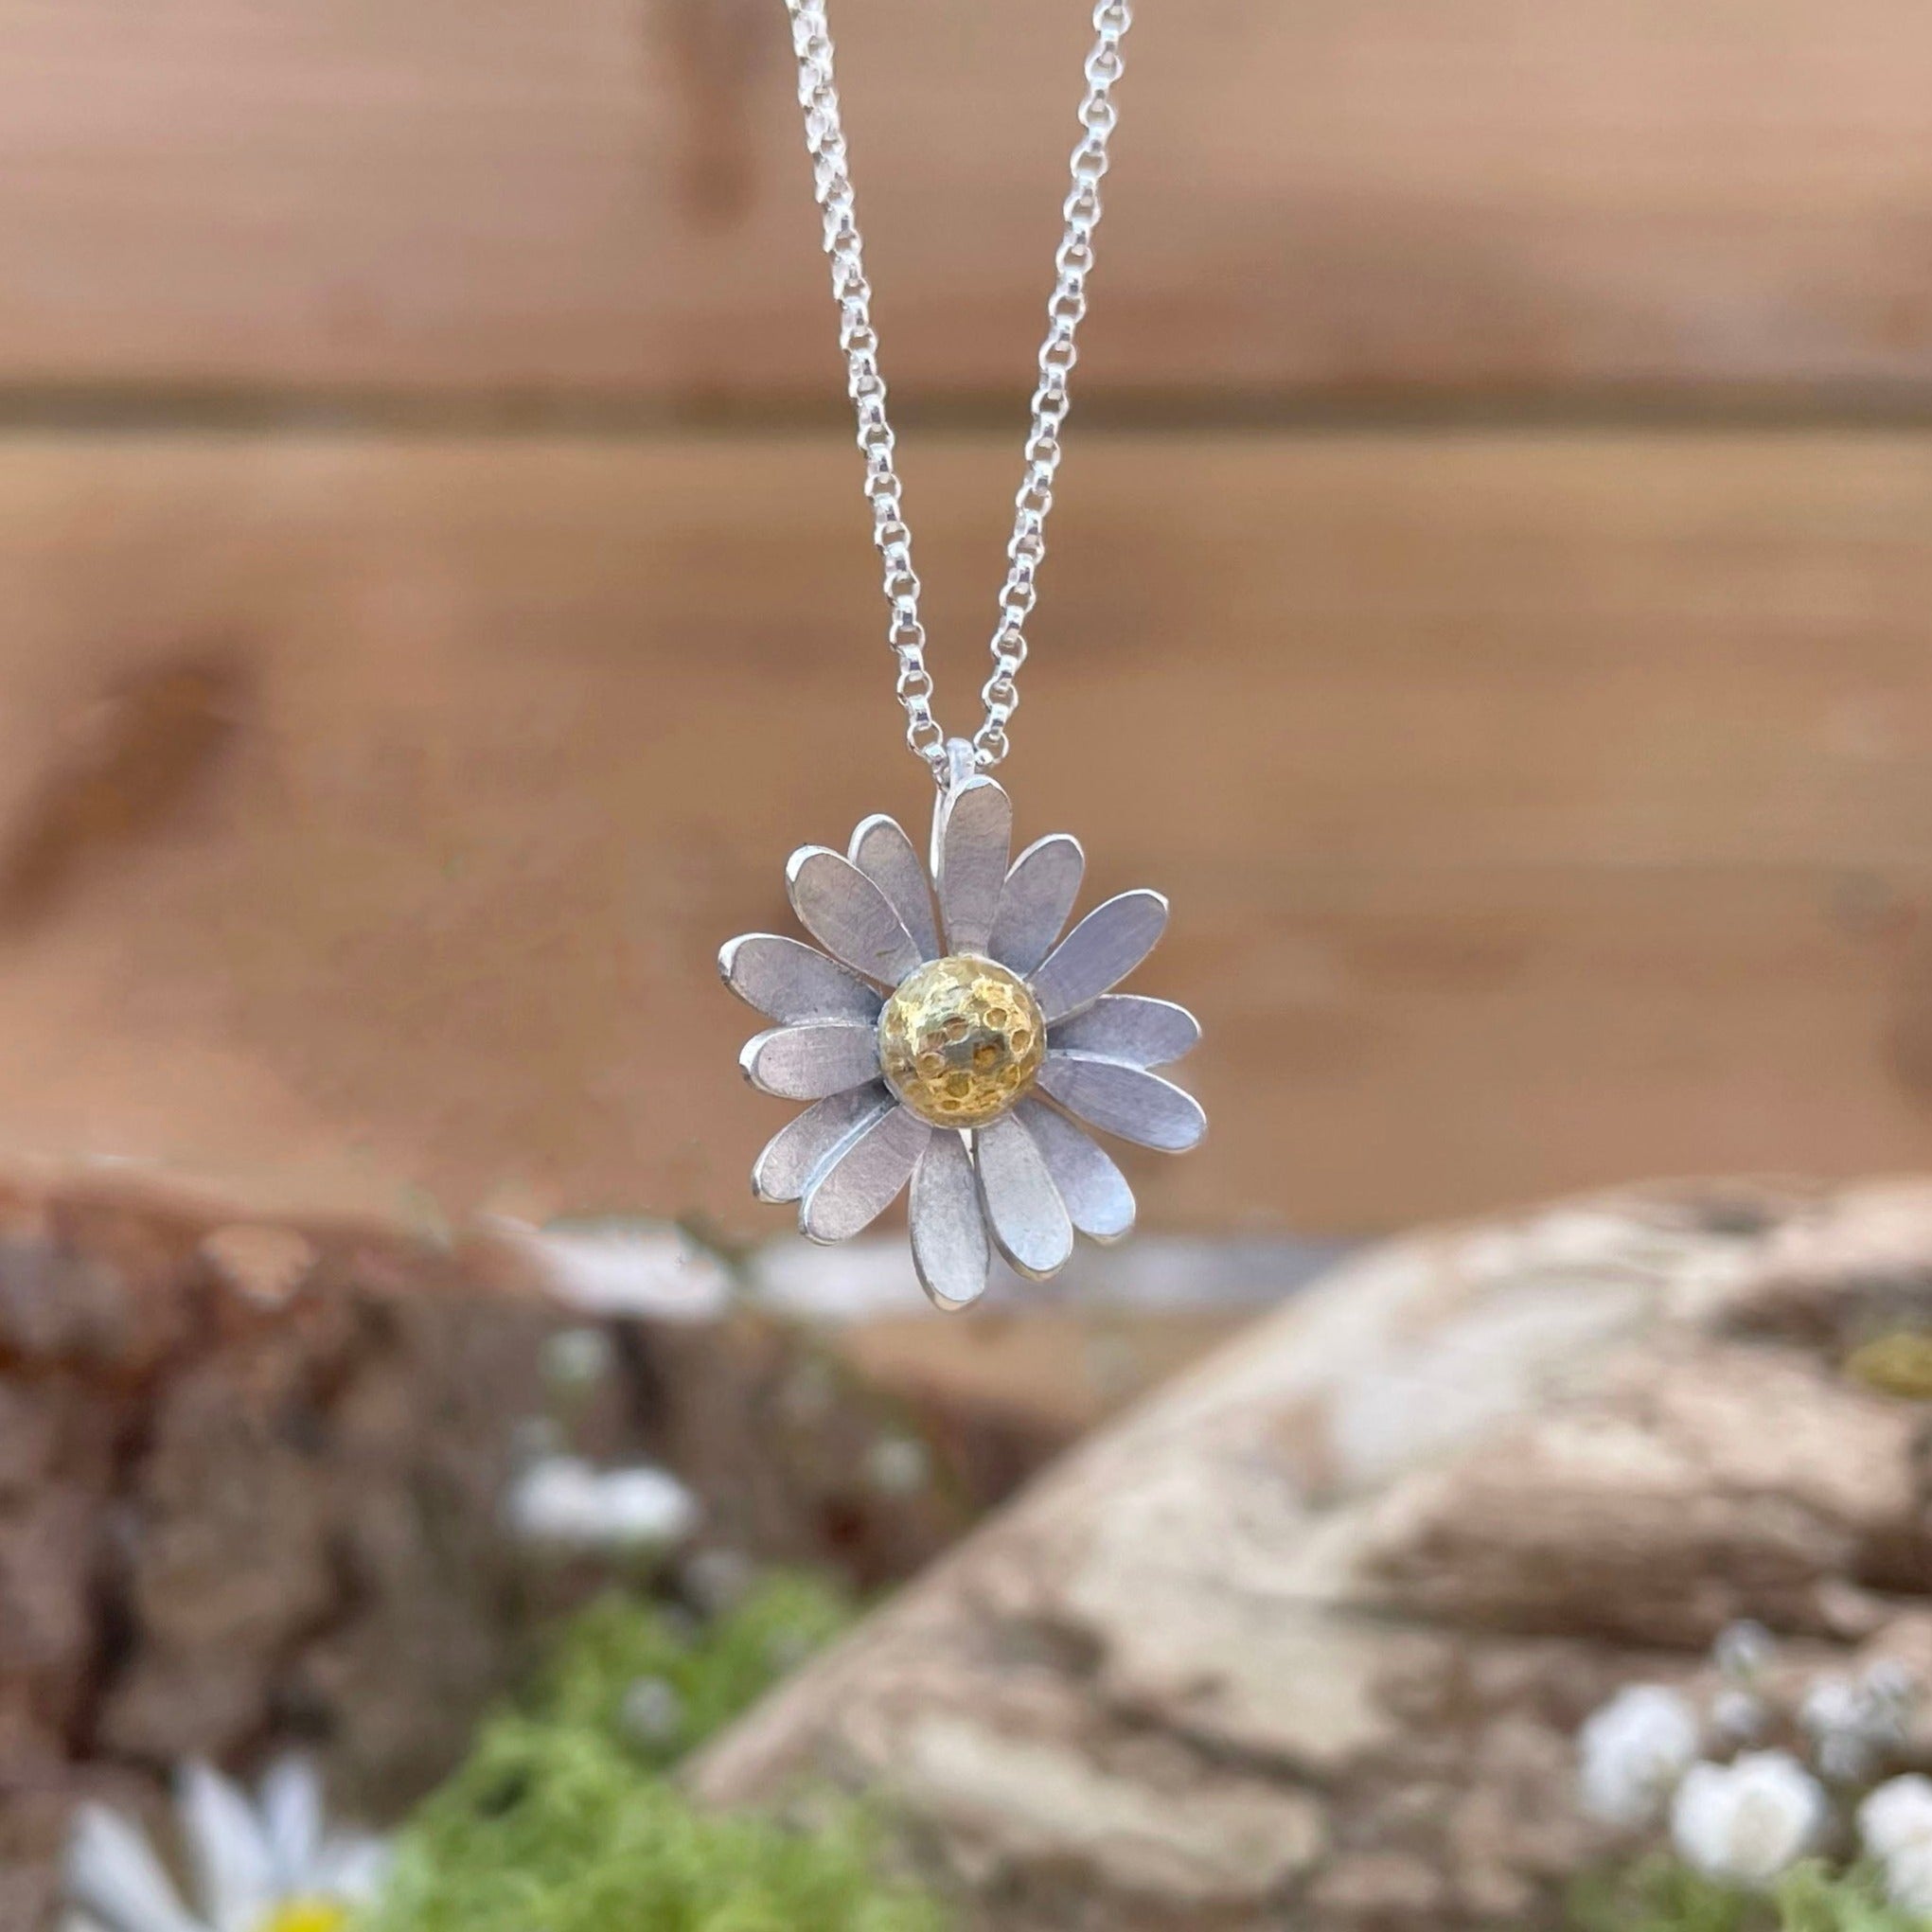 925 Silver Daisy Choker Necklace in Rose Gold Handmade Daisy Chain Floral  Jewelry Filigree Trend Jewelry - Etsy